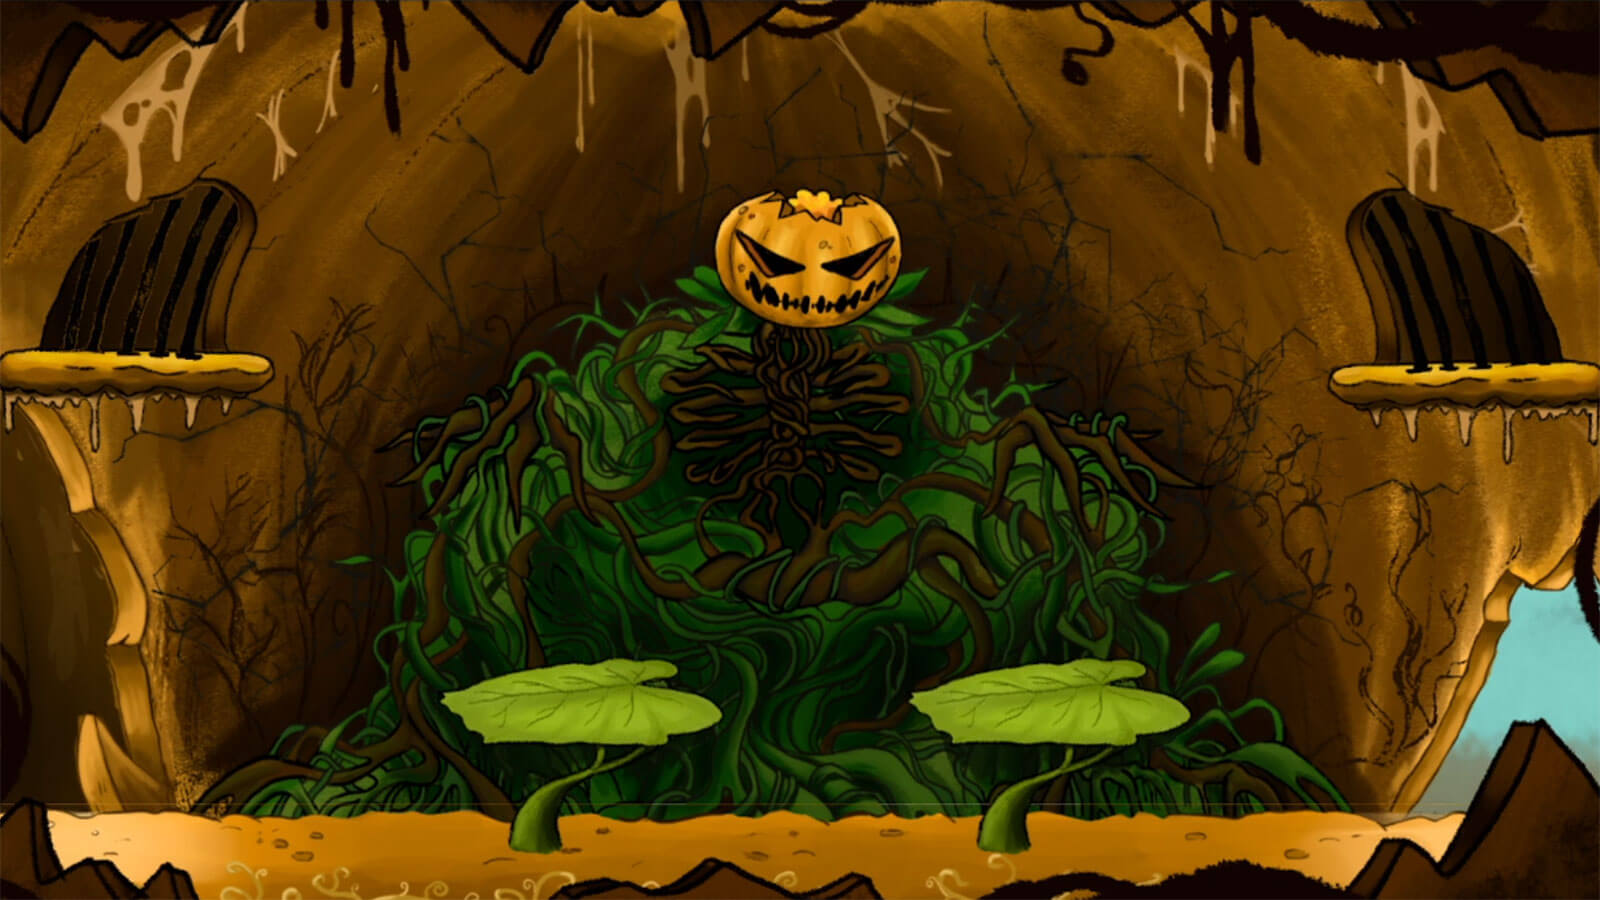 A large pumpkin boss stands in the background with plant platforms in front of it